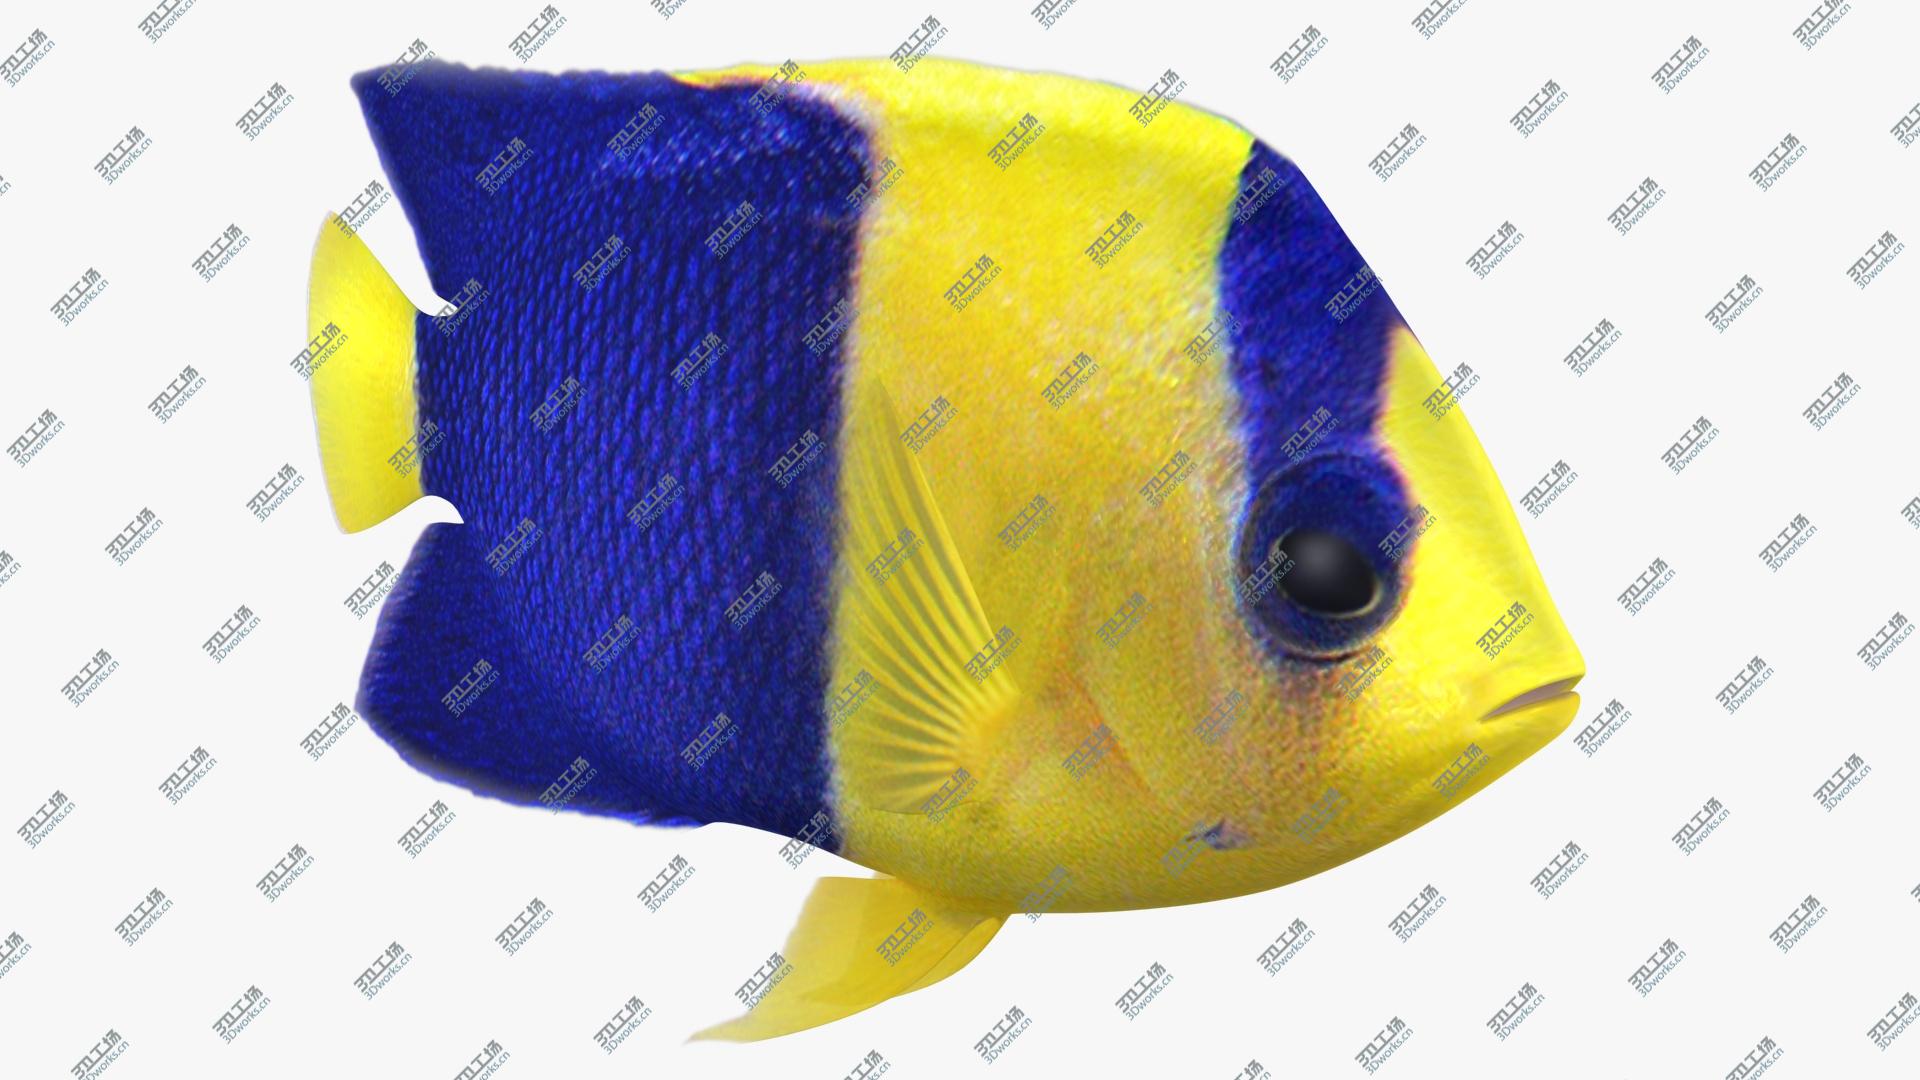 images/goods_img/202105071/3D Bicolor Angelfish Animated/2.jpg